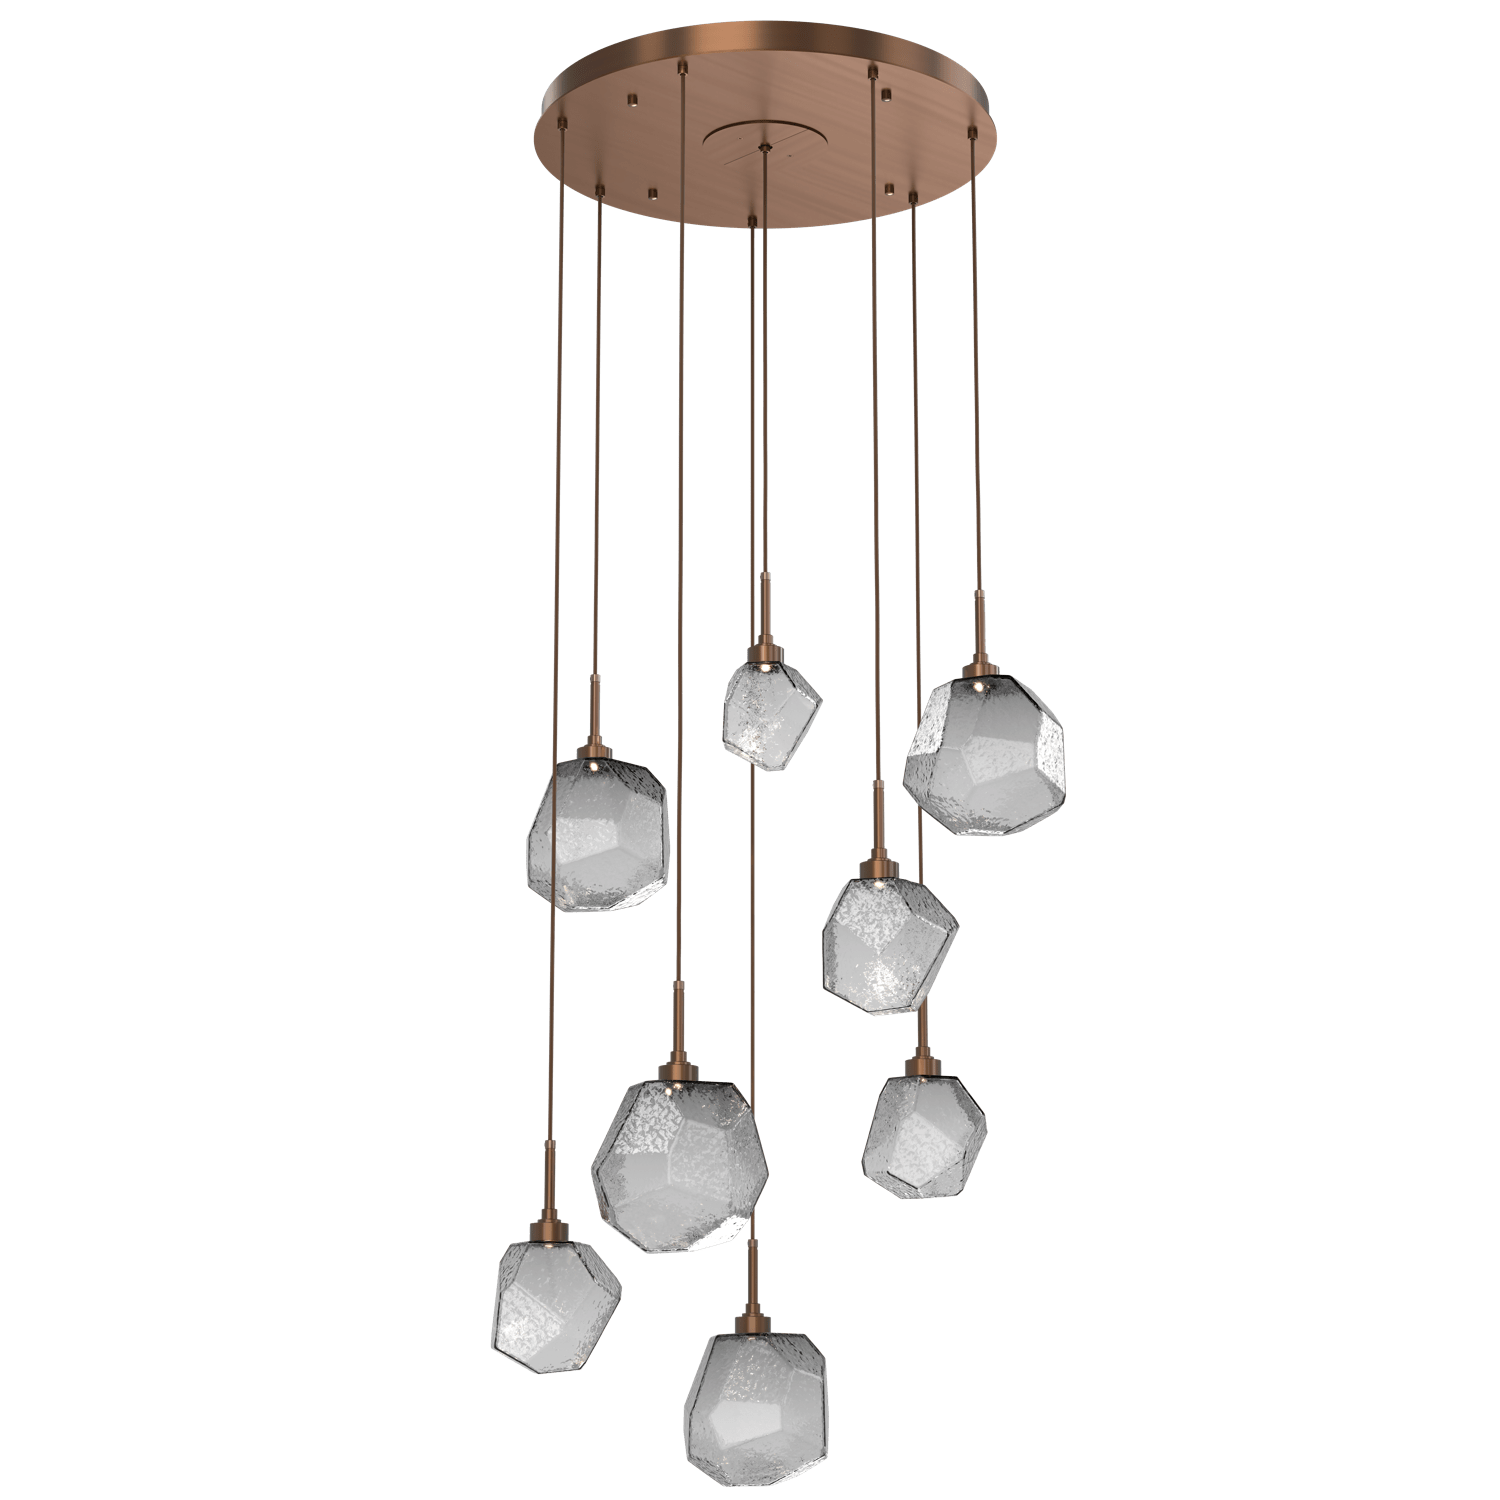 CHB0039-08-RB-S-Hammerton-Studio-Gem-8-light-round-pendant-chandelier-with-oil-rubbed-bronze-finish-and-smoke-blown-glass-shades-and-LED-lamping